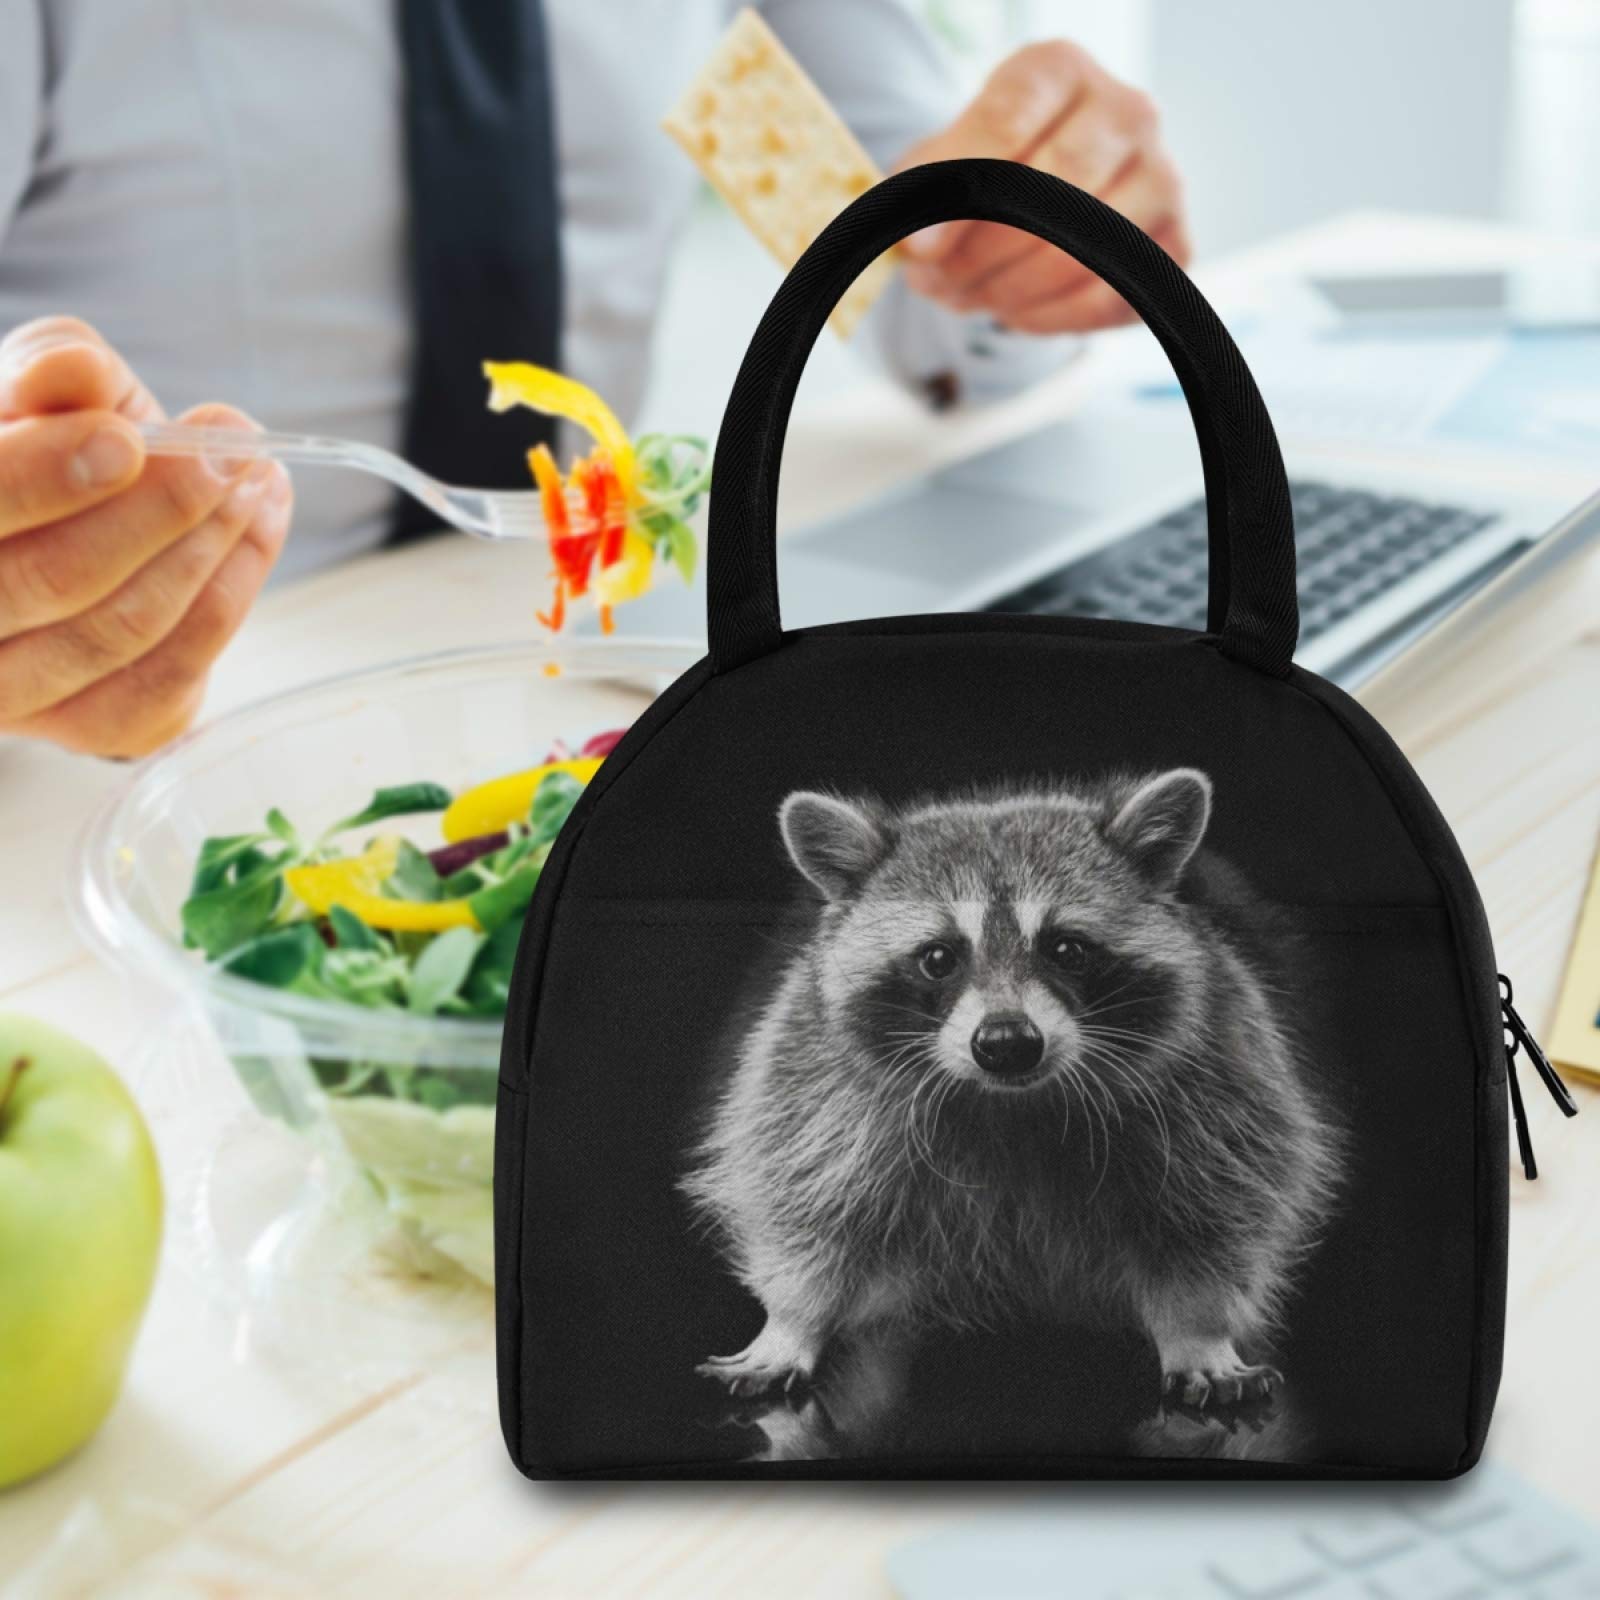 YiGee Animal Raccoon Lunch Bag Tote Bag, Insulated Organizer Zippered Lunch Box Lunchbox Lunch Container Handbag for Women Men Home Office Picnic Beach Use